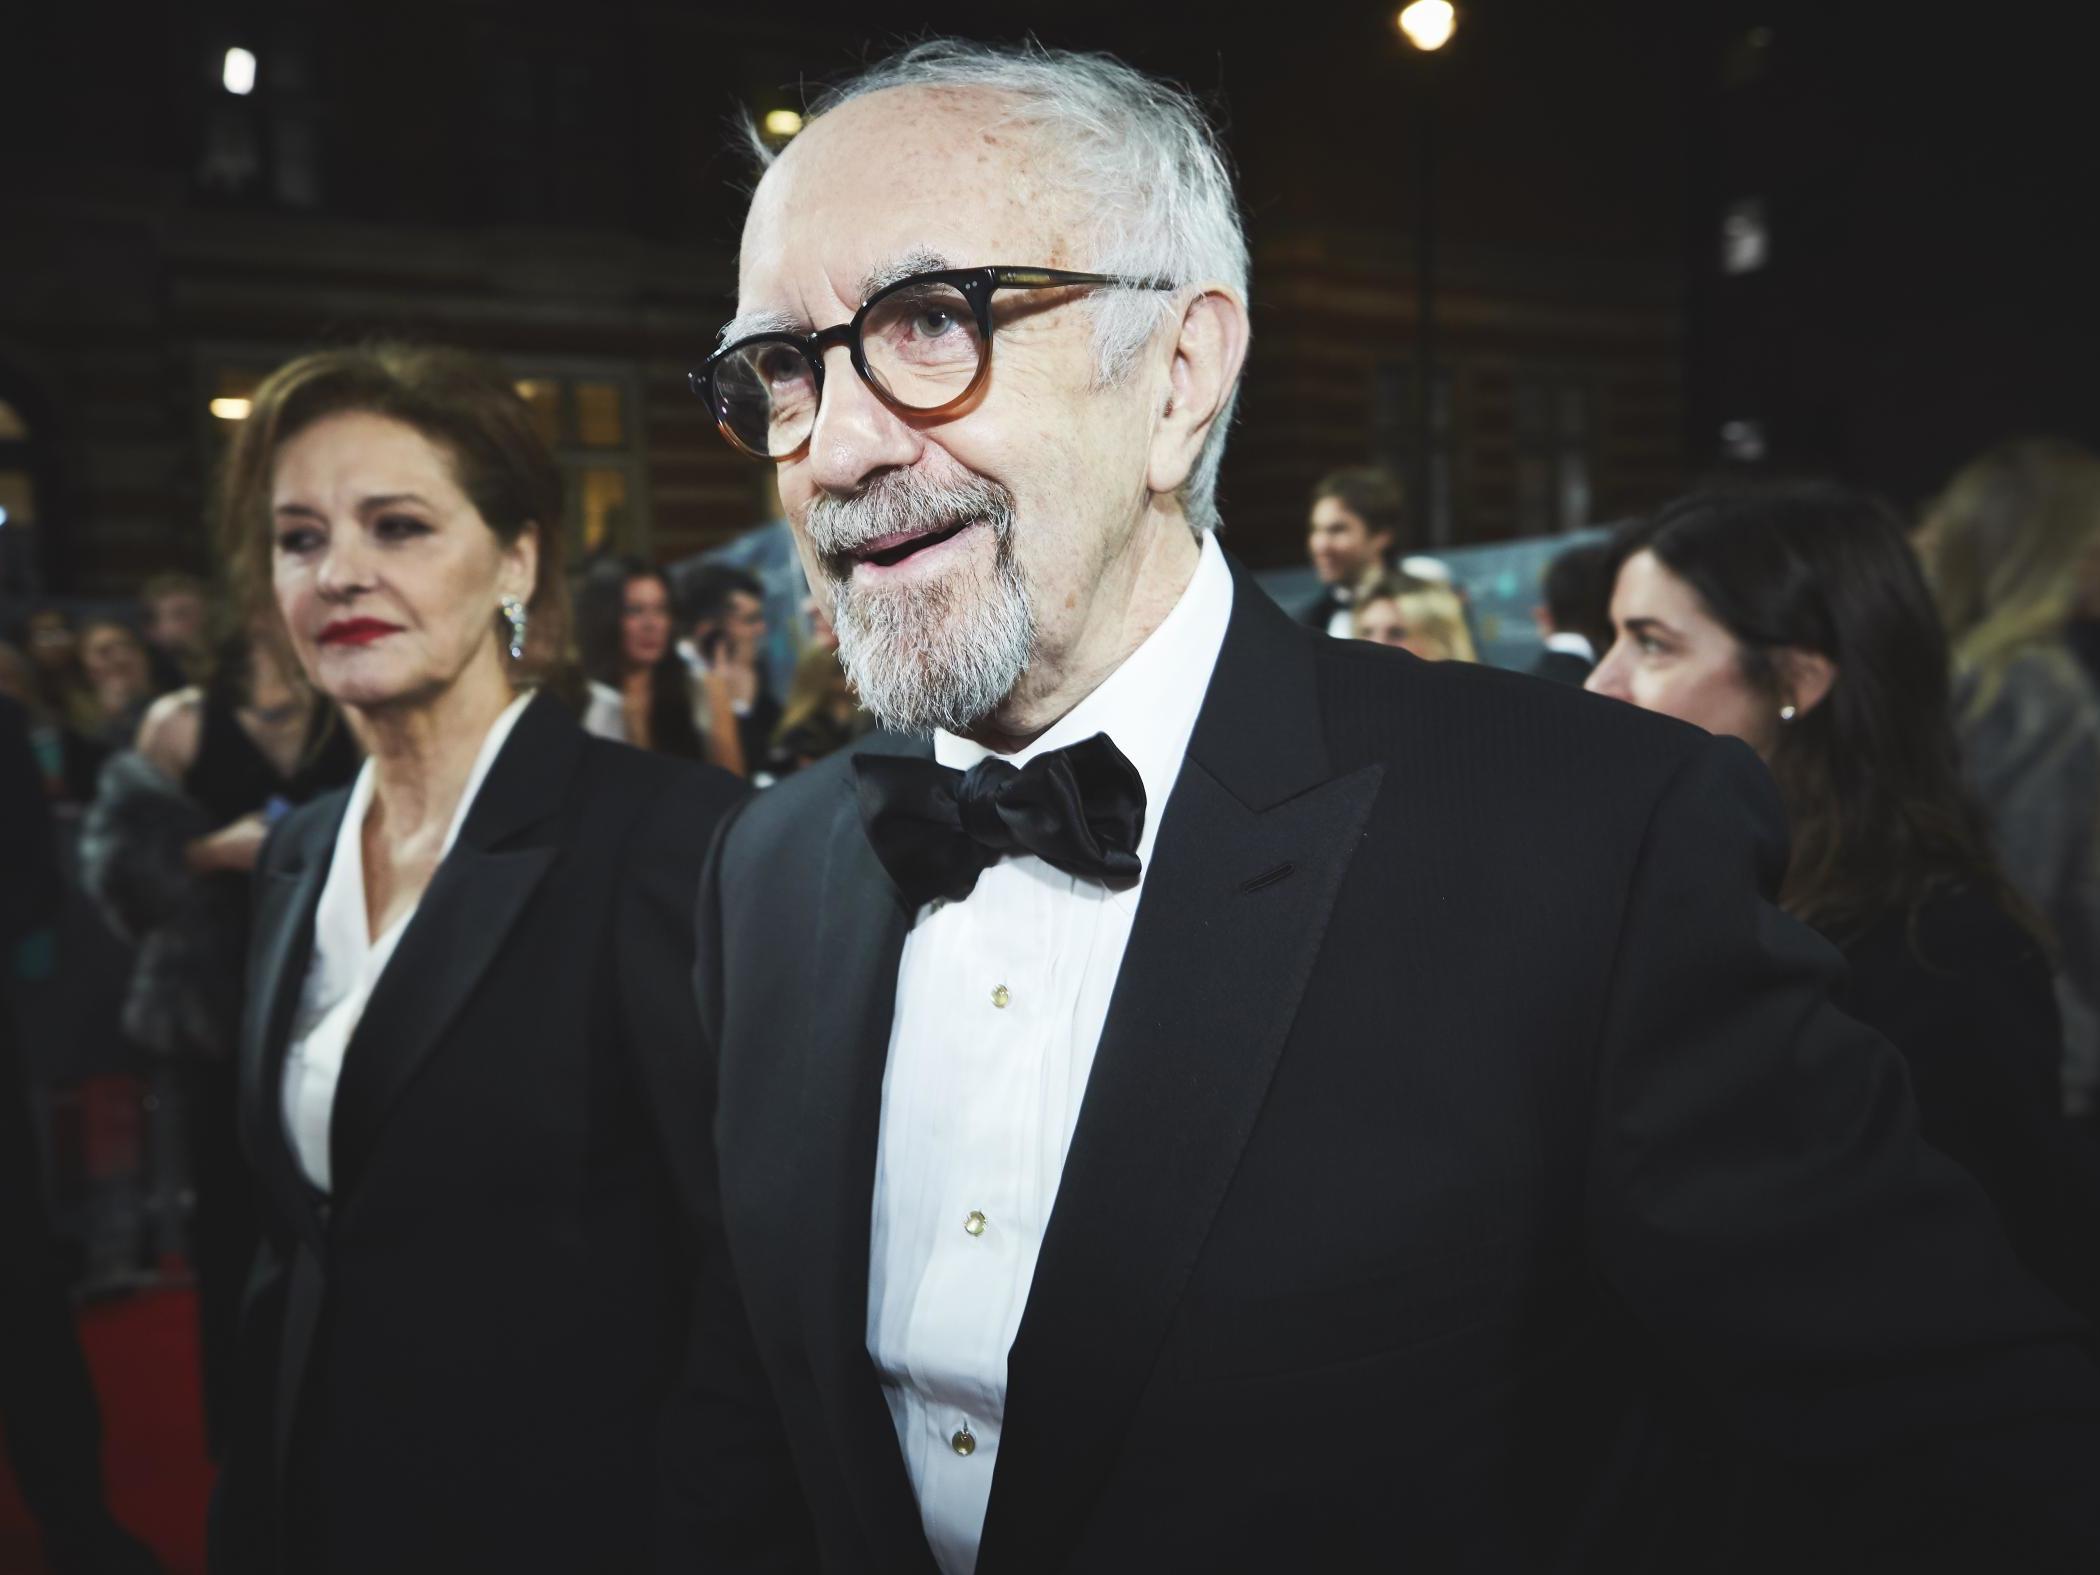 Jonathan Price at the 73rd British Academy Film Awards in February 2020